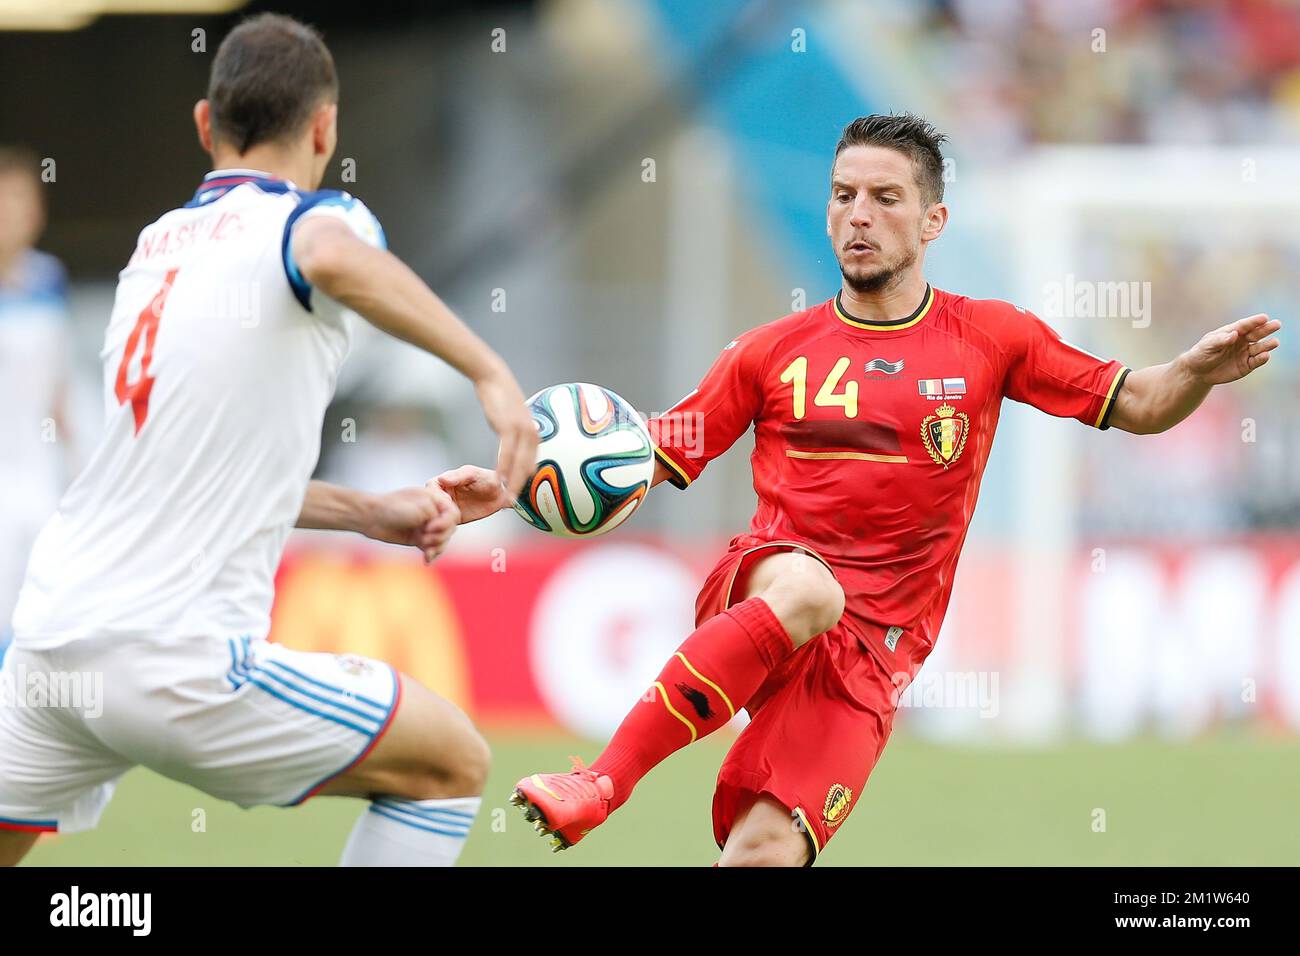 20140622 - RIO DE JANEIRO, BRAZIL: Russia's Sergei Ignashevich and Belgium's Dries Mertens fight for the ball during a soccer game between Belgian national team The Red Devils and Russia in Rio de Janeiro, Brazil, the second game in Group H of the first round of the 2014 FIFA World Cup, Sunday 22 June 2014. BELGA PHOTO BRUNO FAHY Stock Photo